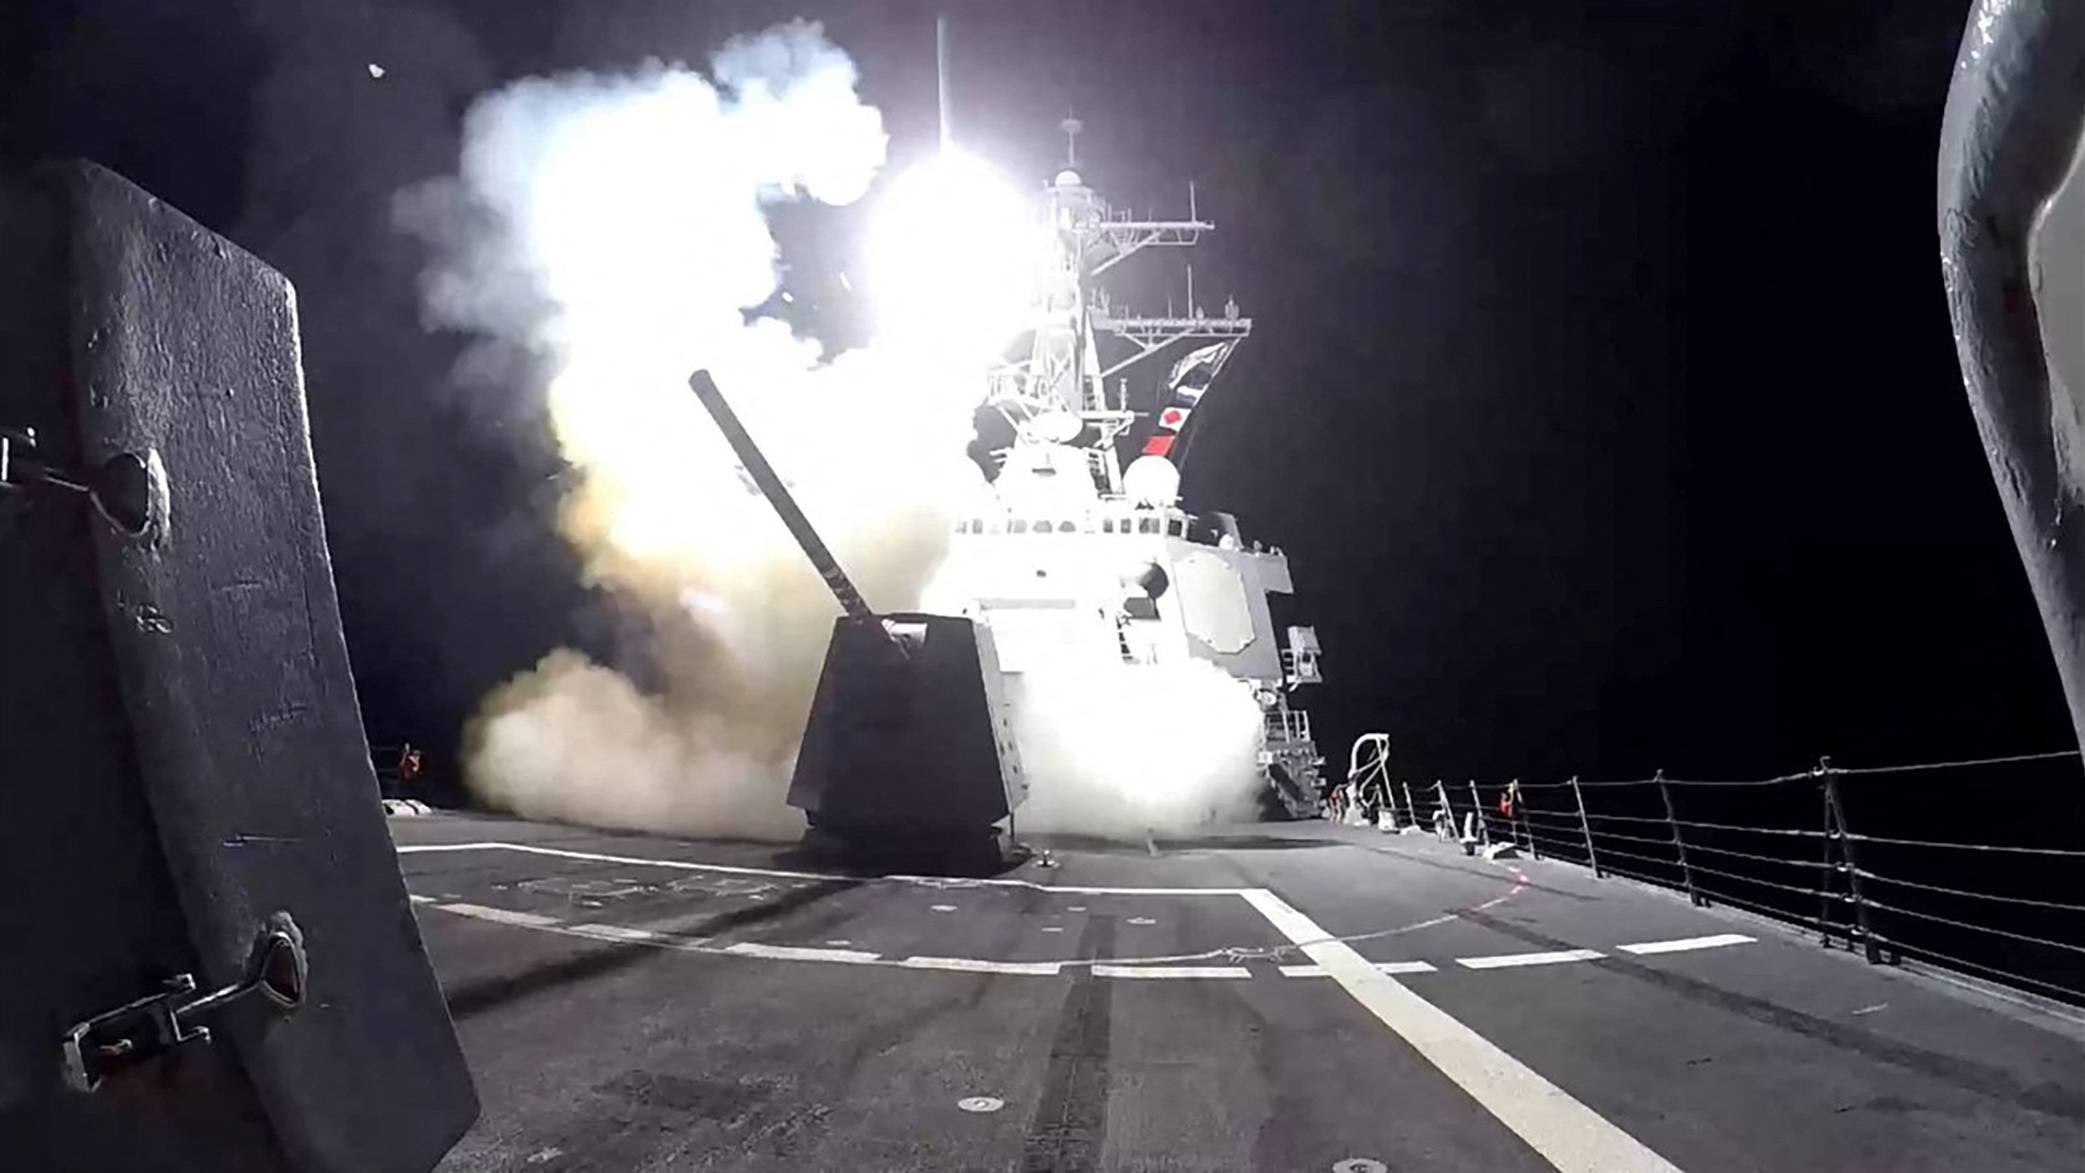 A Tomahawk missile is launched from the USS Gravely against Houthi military targets in Yemen. /U.S. Central Command/Reuters